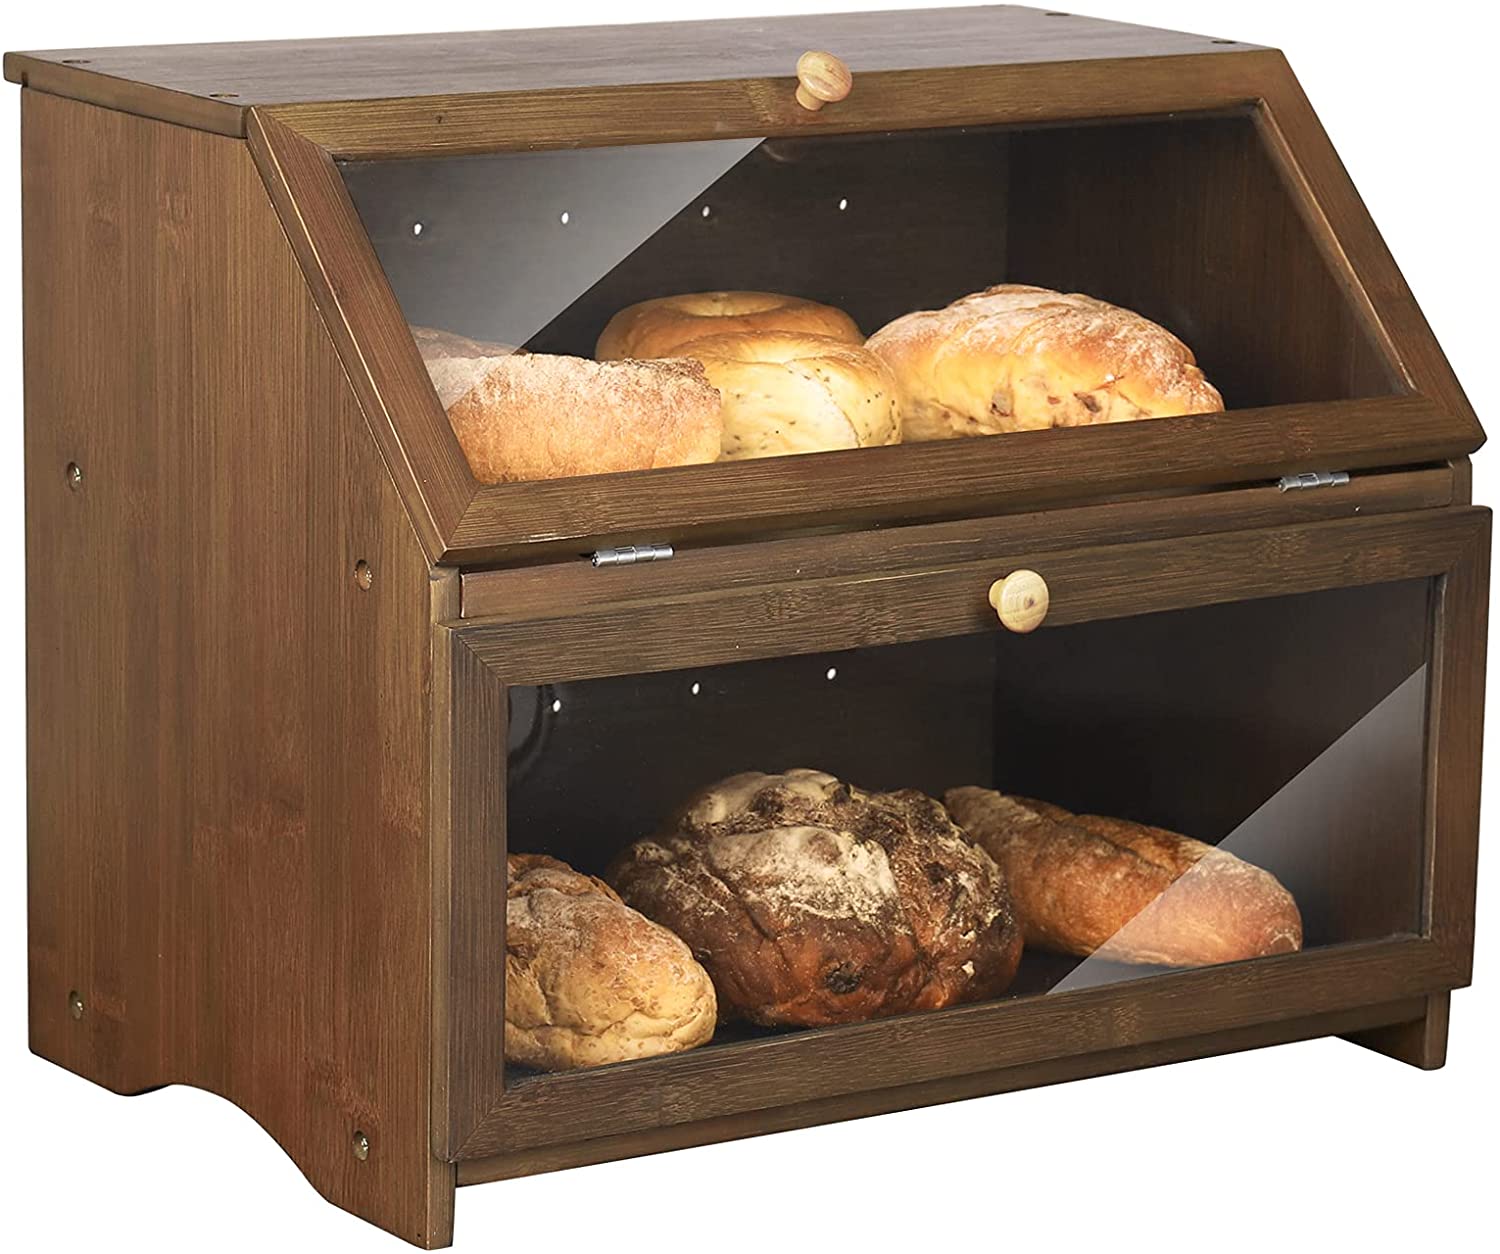 15 Best Bread Box Options for Fresher Bread in 2022